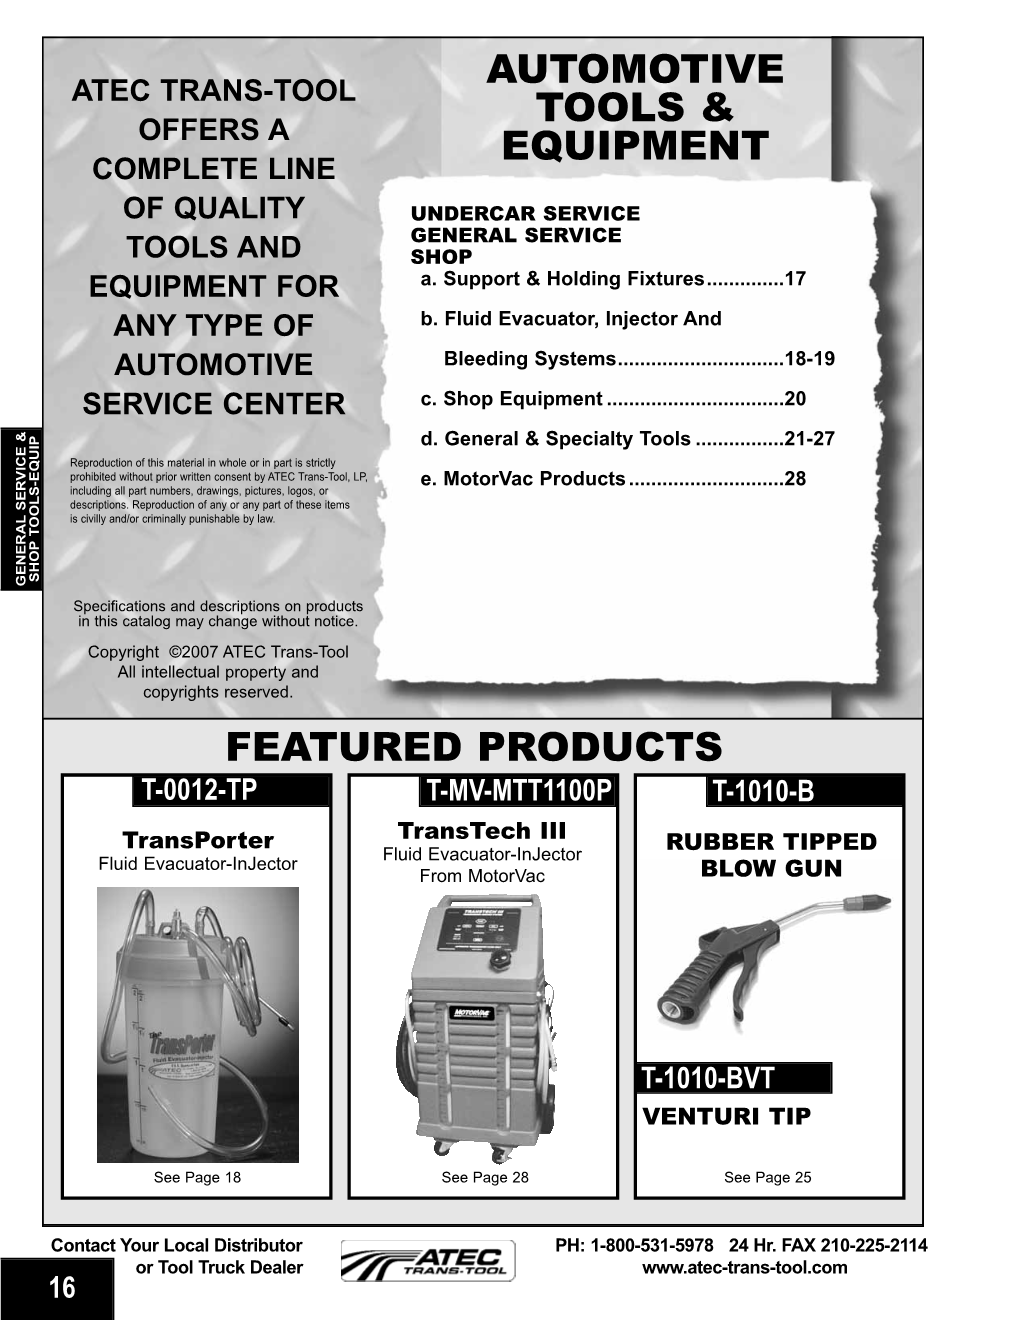 Automotive Tools & Equipment Featured Products